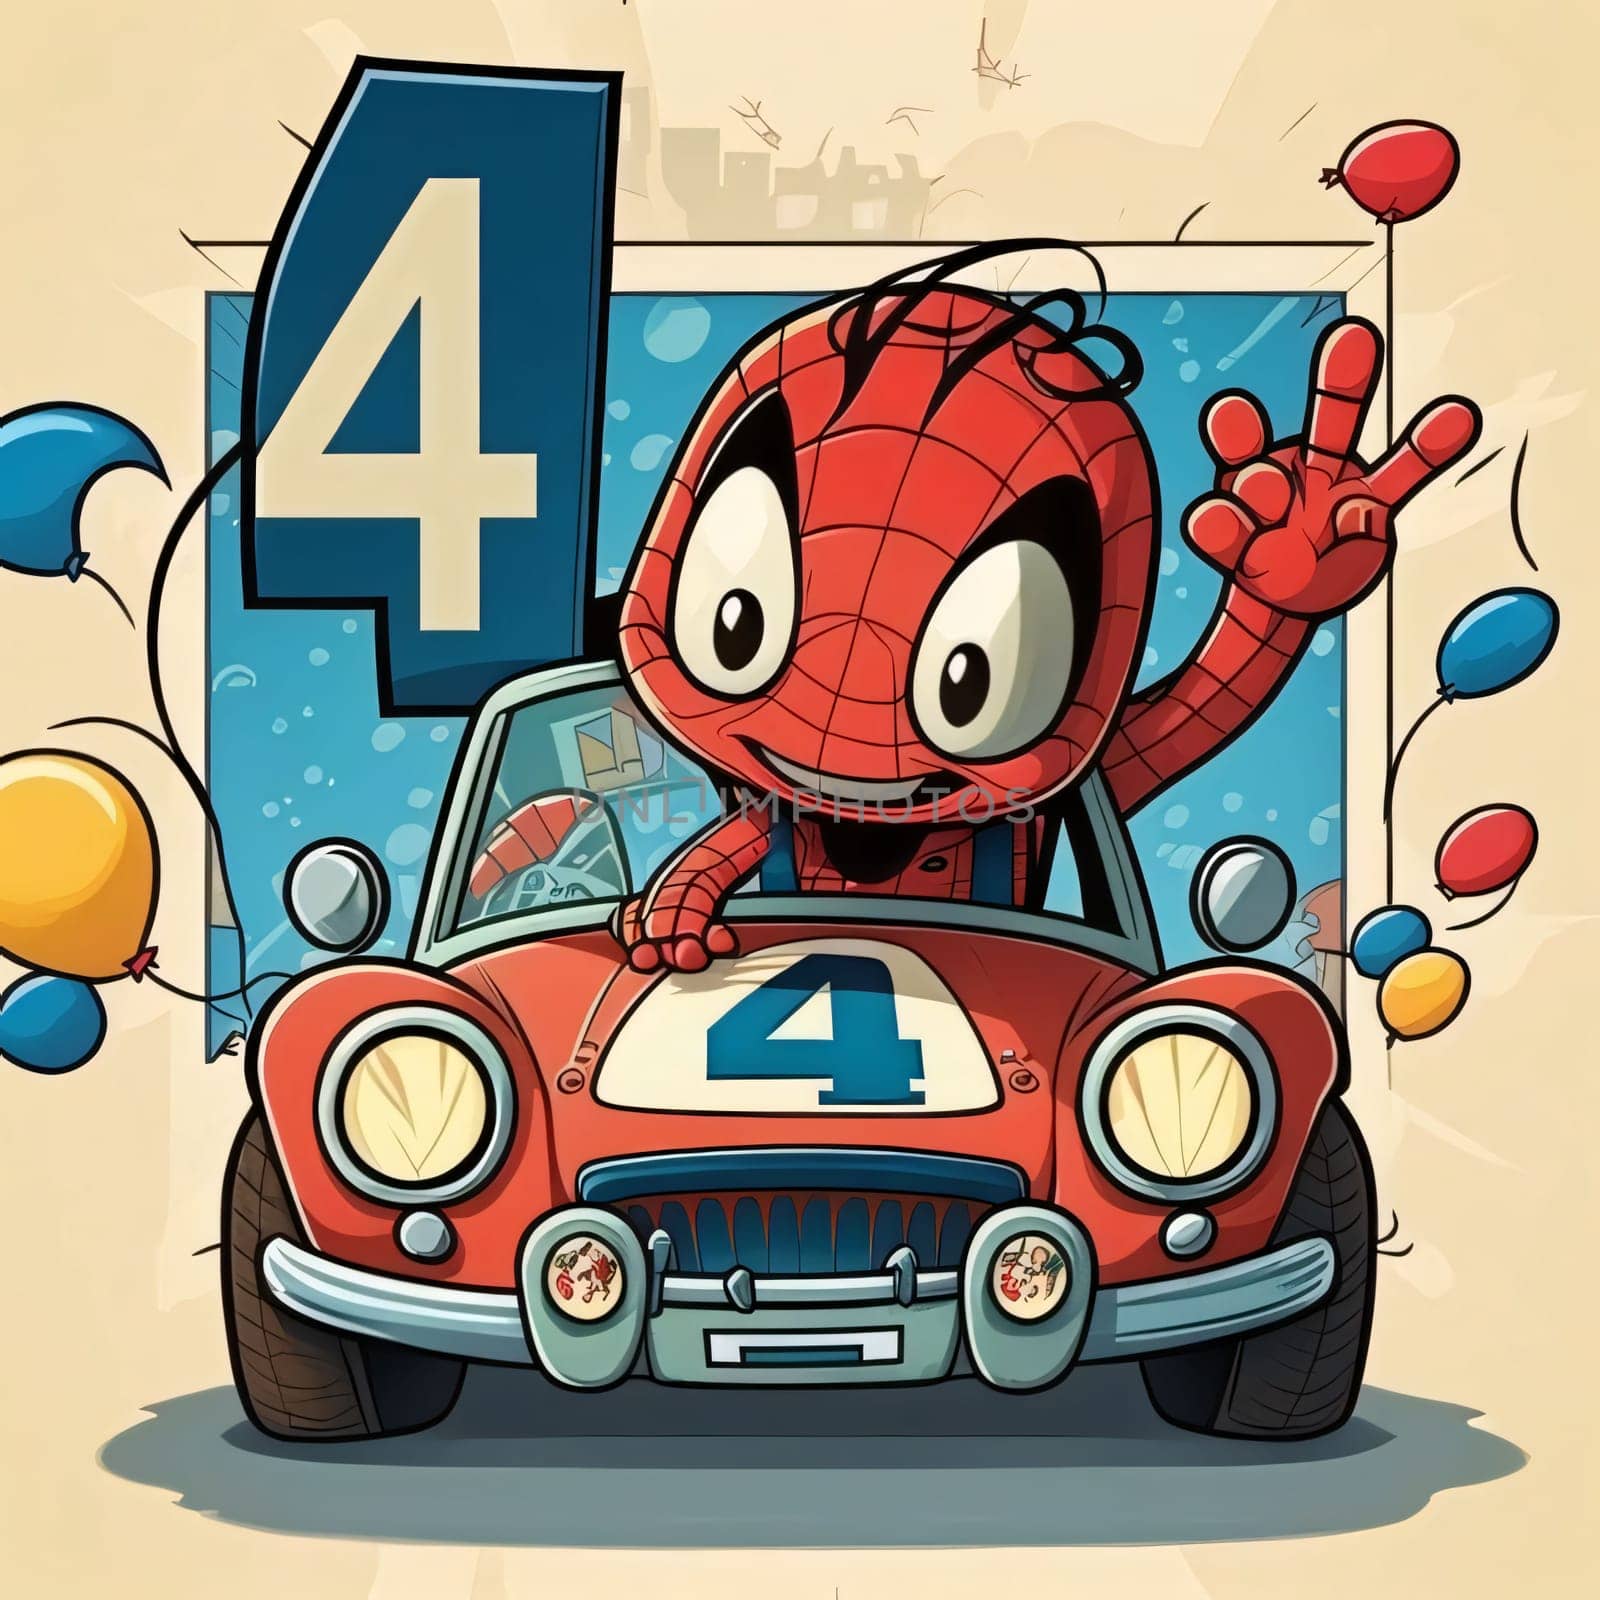 Graphic numbers: Vector illustration of Cartoon Cute Red Robot with Number Four on the Car